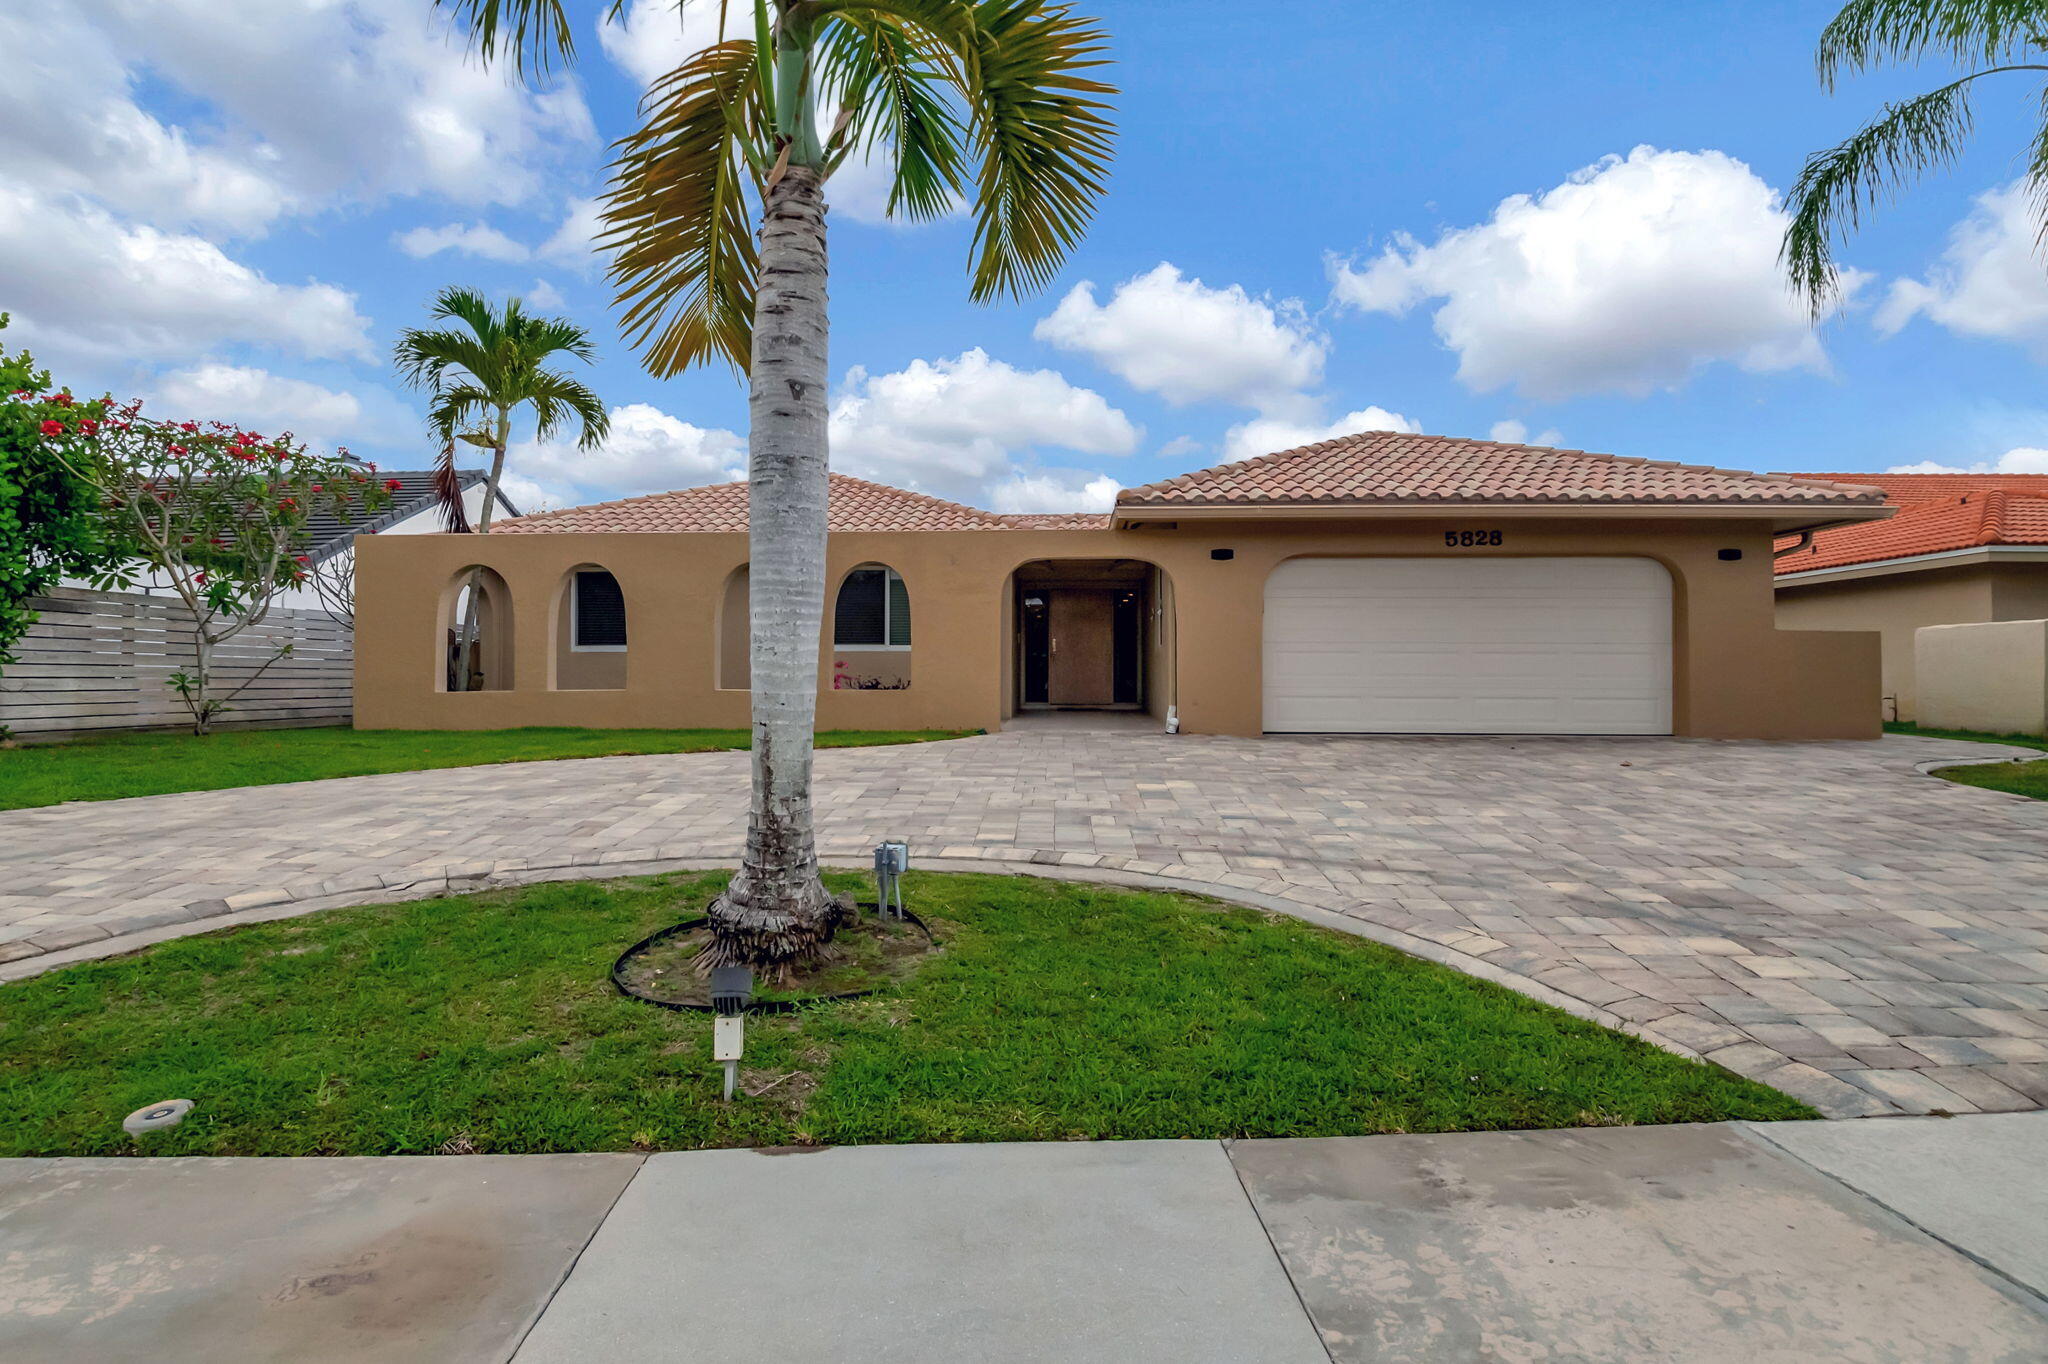 Property for Sale at 5828 Wind Drift Lane, Boca Raton, Palm Beach County, Florida - Bedrooms: 4 
Bathrooms: 4  - $1,425,000